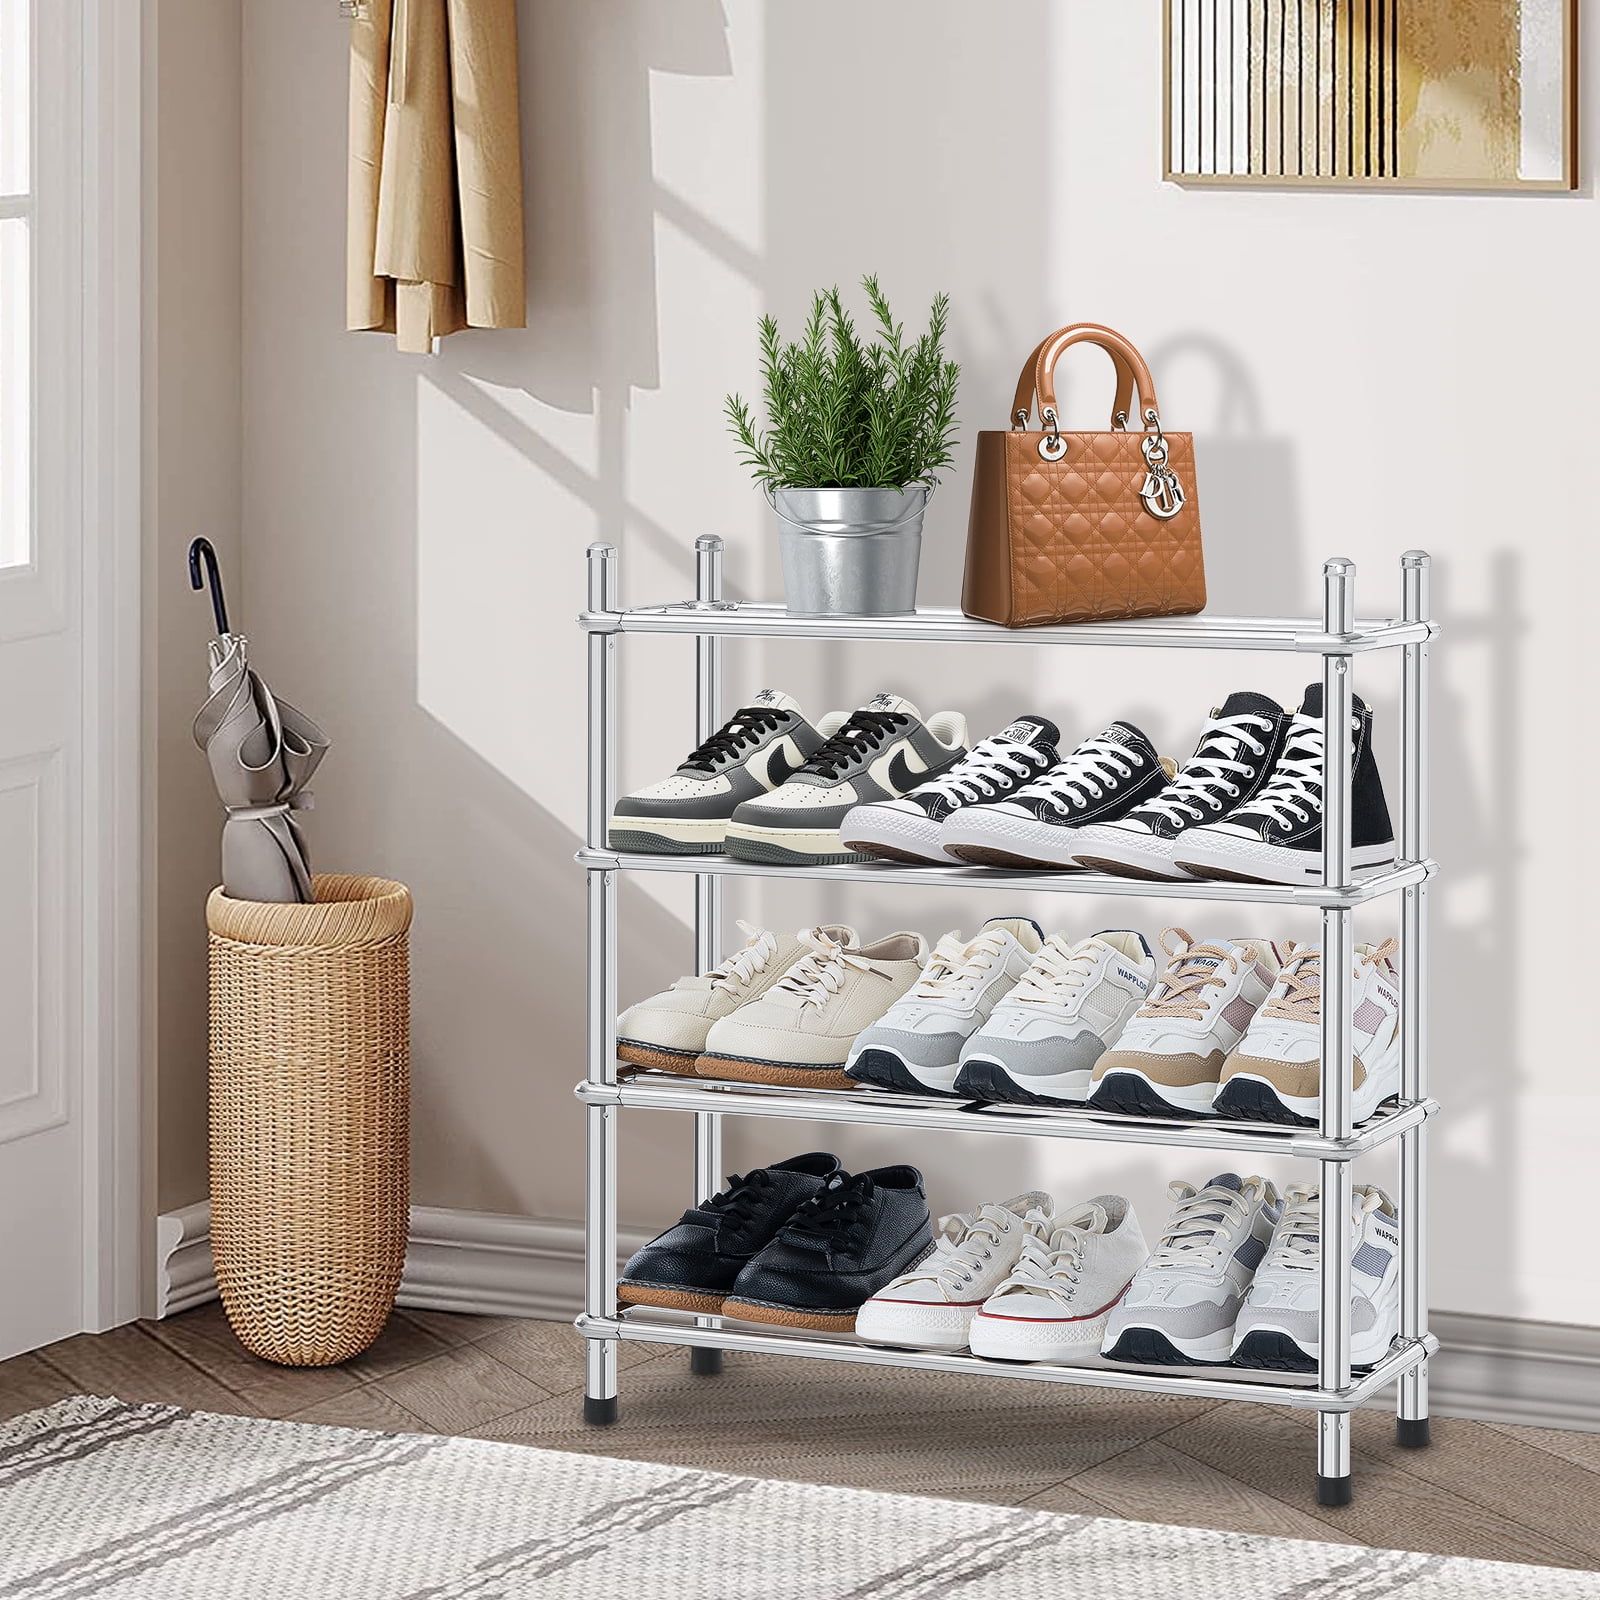  HOMEFORT 4-Tier Metal Shoe Rack, All-Metal Shoe Tower,Shoe  Storage Shelf with MDF Top Board,Each Tier Fits 3 Pairs of Shoes,Entryway Shoes  Organizer with Sturdy Metal Shelves .Rustic Brown : Home 